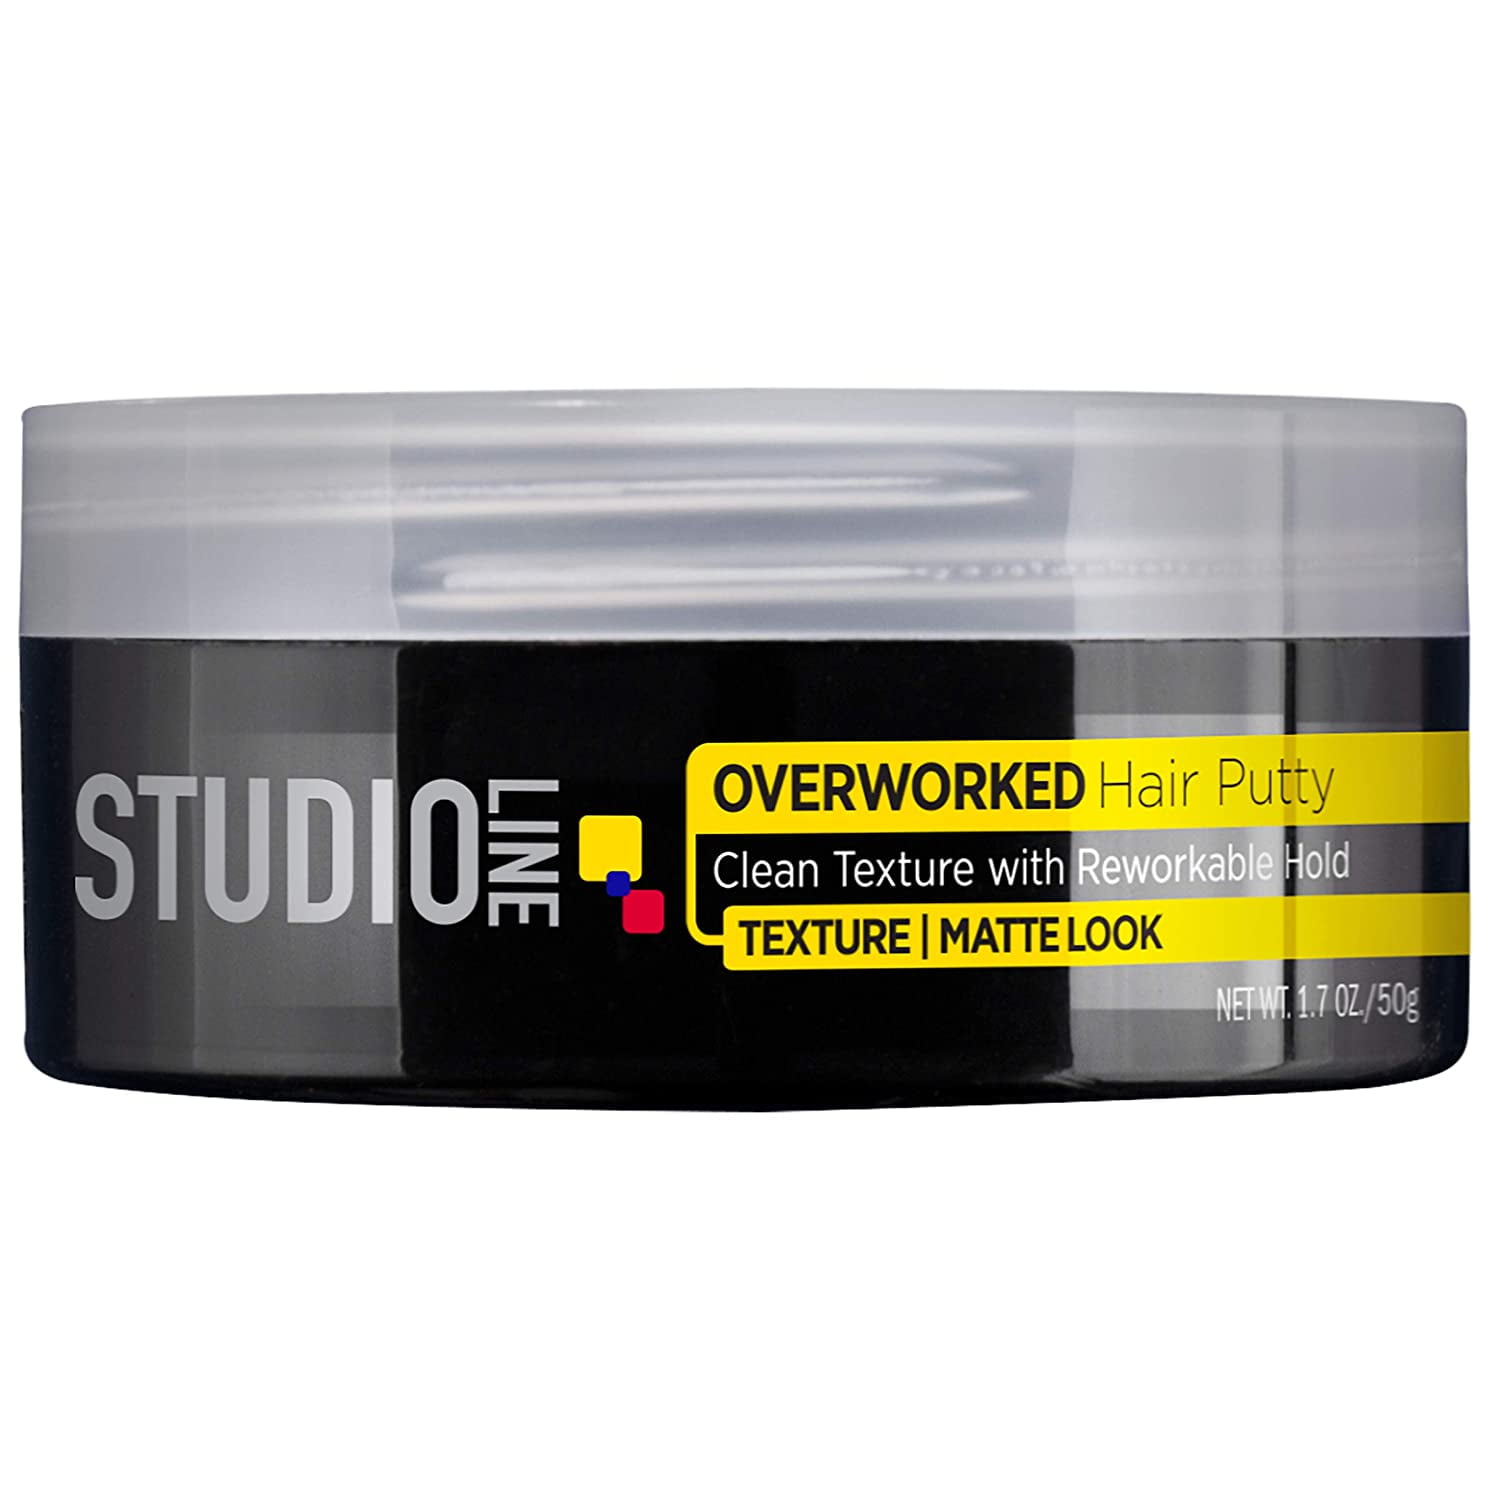 Loreal Paris Studio Line Texture And Control Overworked Hair Putty Styling  Paste,  Oz (2 Pack) 